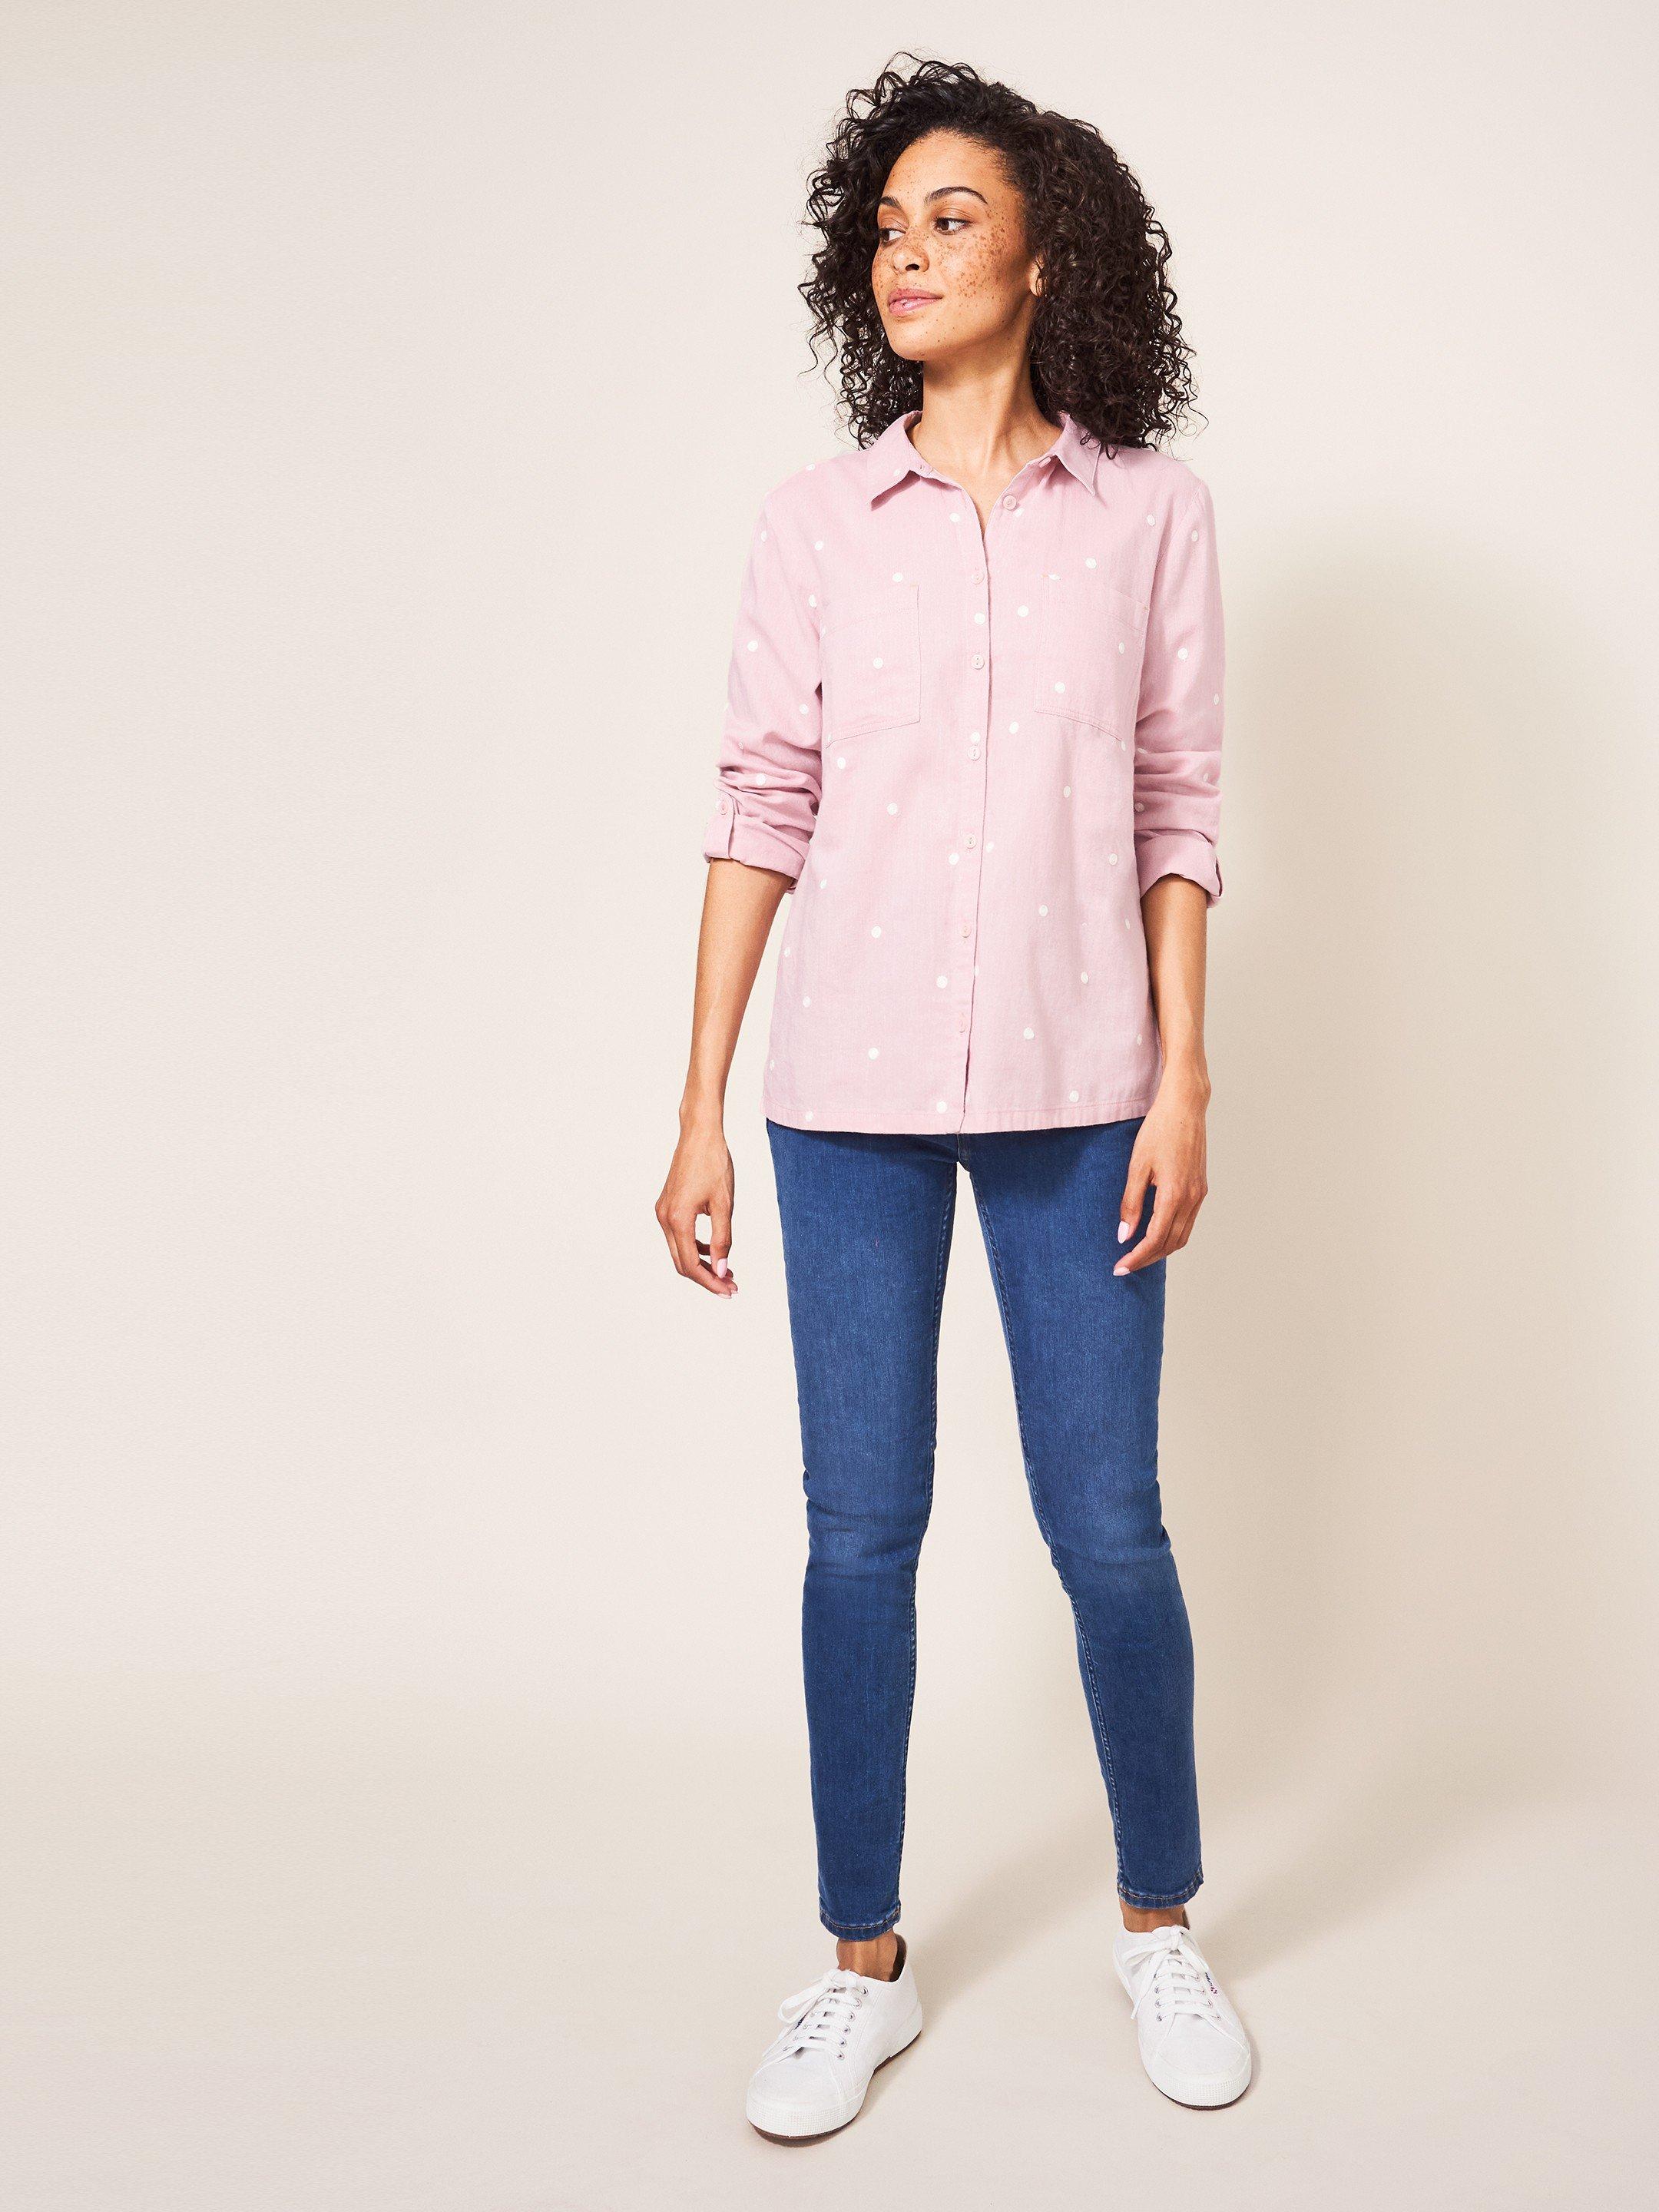 Emilia Organic Cotton Long Sleeve Shirt in PINK MLT - MODEL FRONT